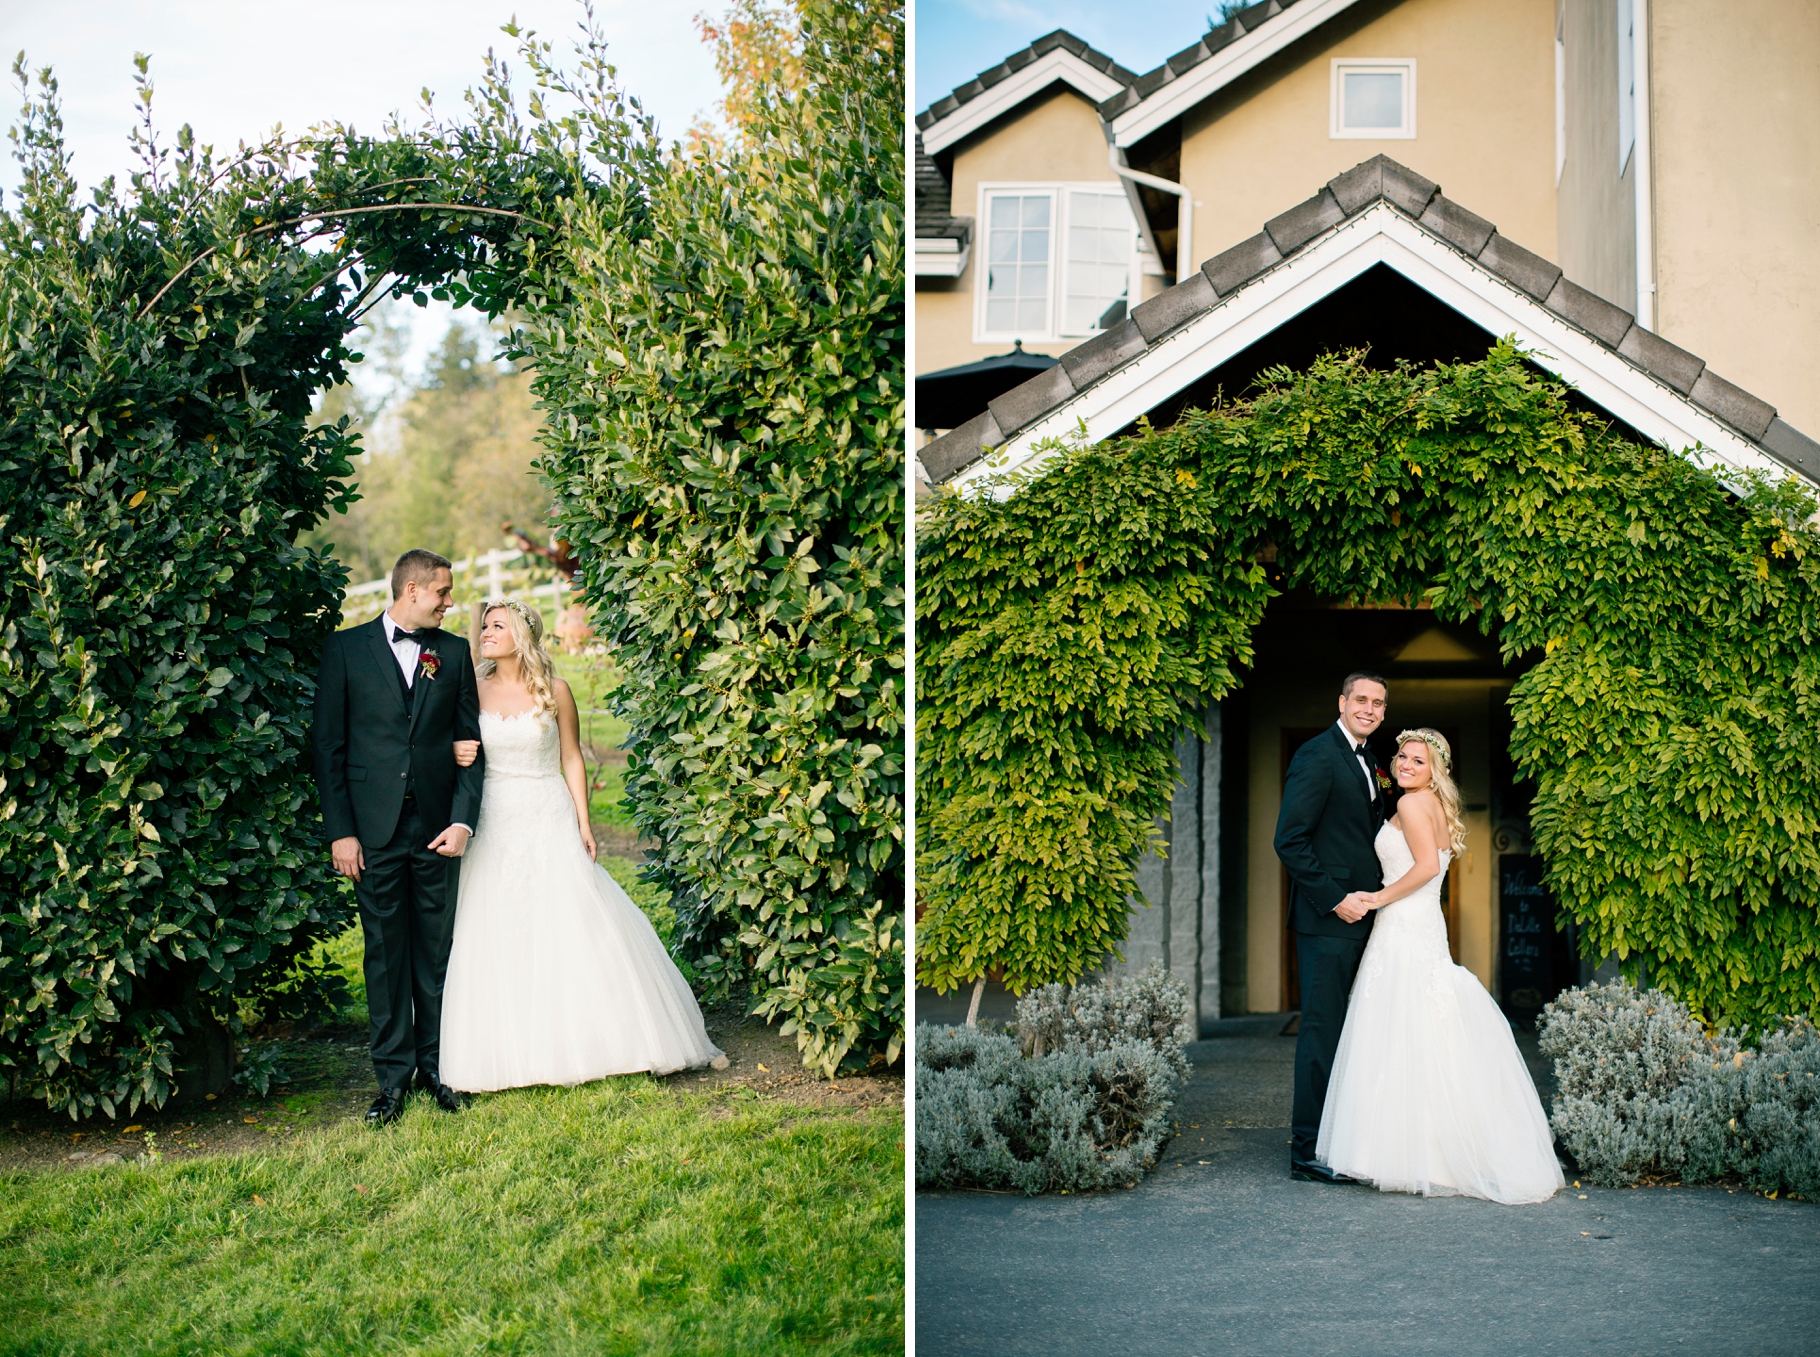 32-Bride-Groom-Portraits-Delille-Cellars-Chateau-Vineyard-Woodinville-Wedding-Photographer-Photography-by-Betty-Elaine